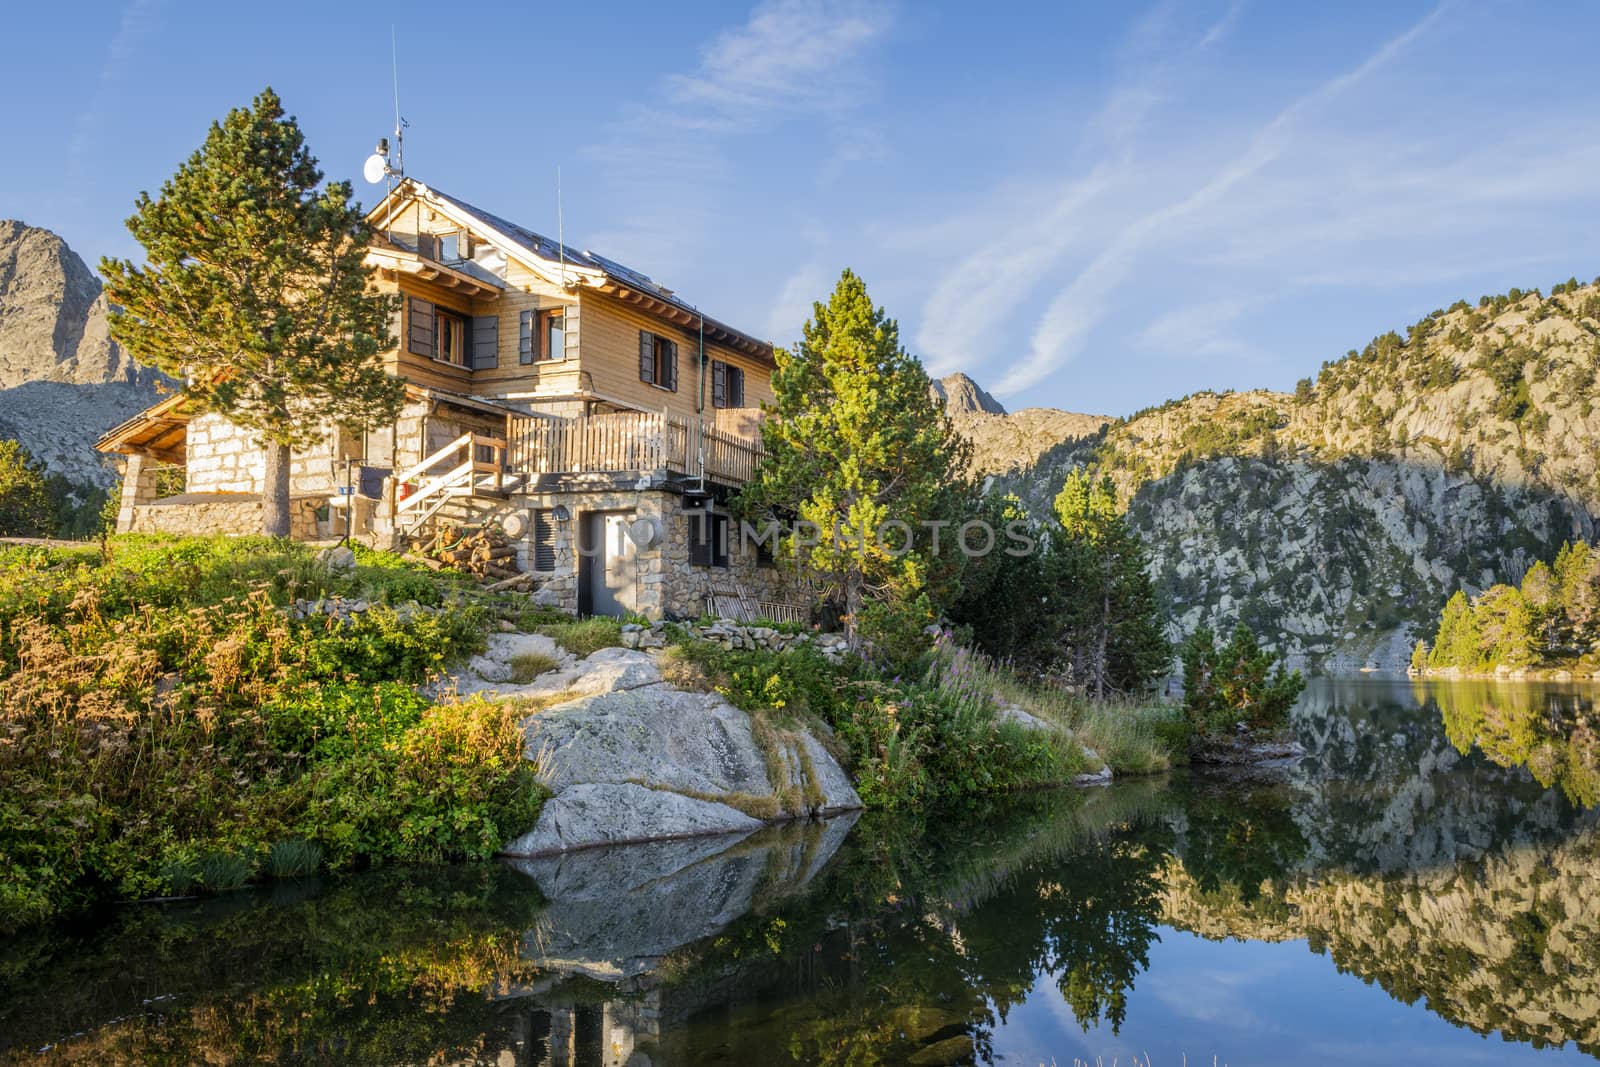 Espot, Spain, September 2015: View on JM blanck mountain hut in the Spanish Pyrenees during golden hour